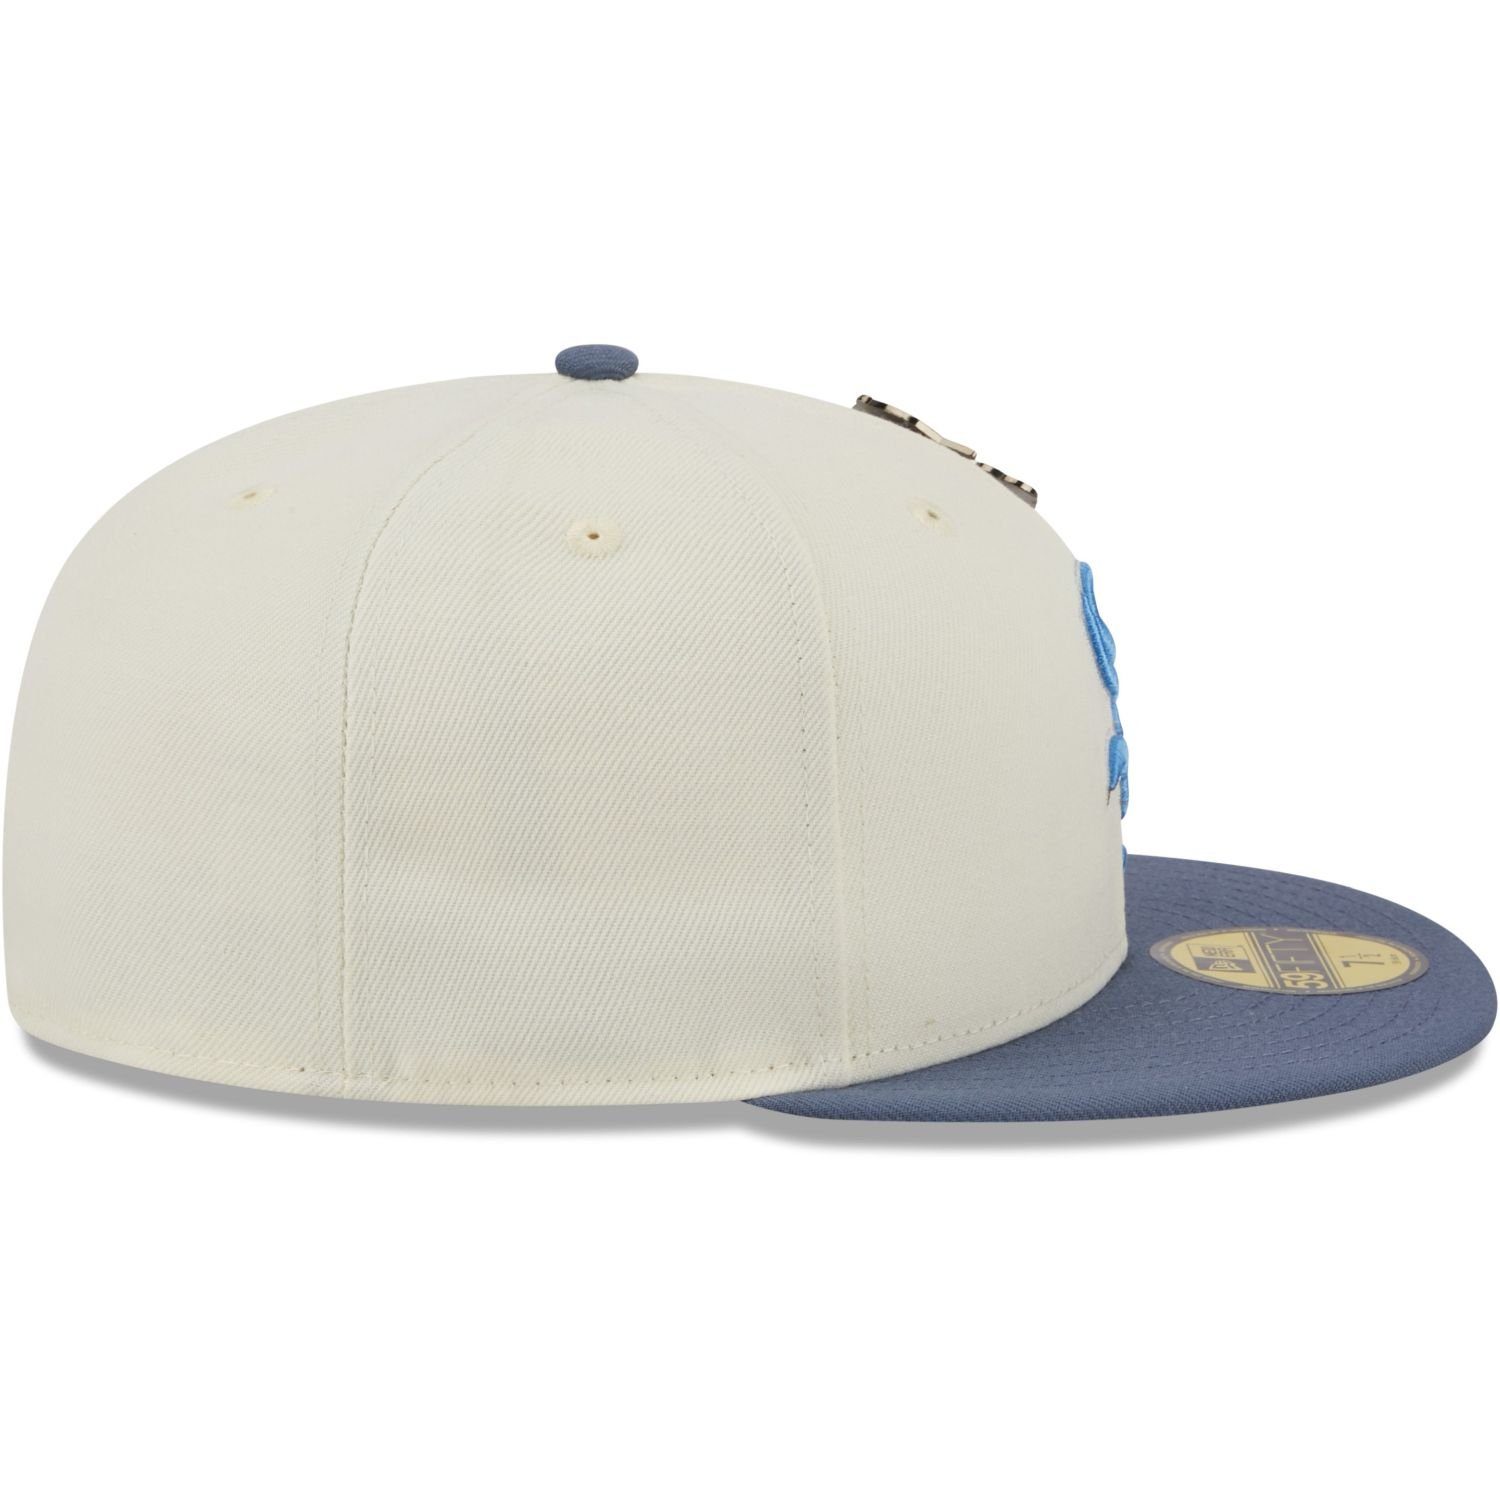 Cap PIN New Era ELEMENTS Chicago 59Fifty Sox Fitted White